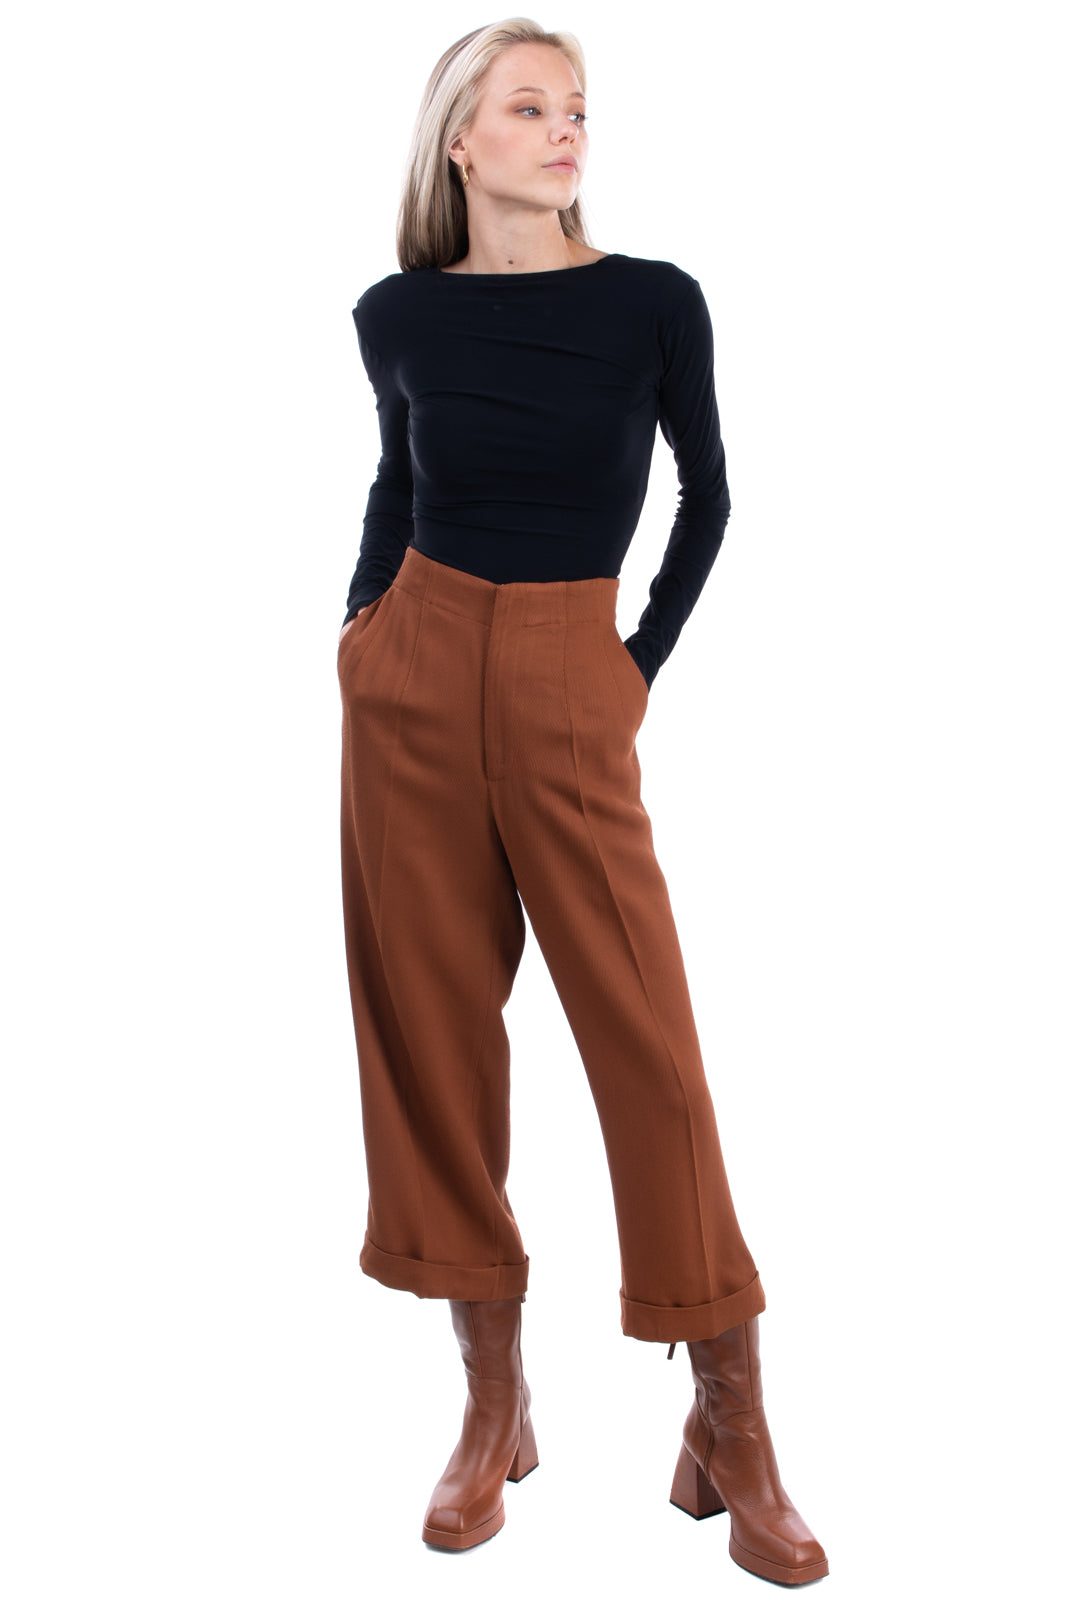 Nice Things blue cupro long trousers with zip fastening for women Size 40  Color 513 Size 40 Color 513